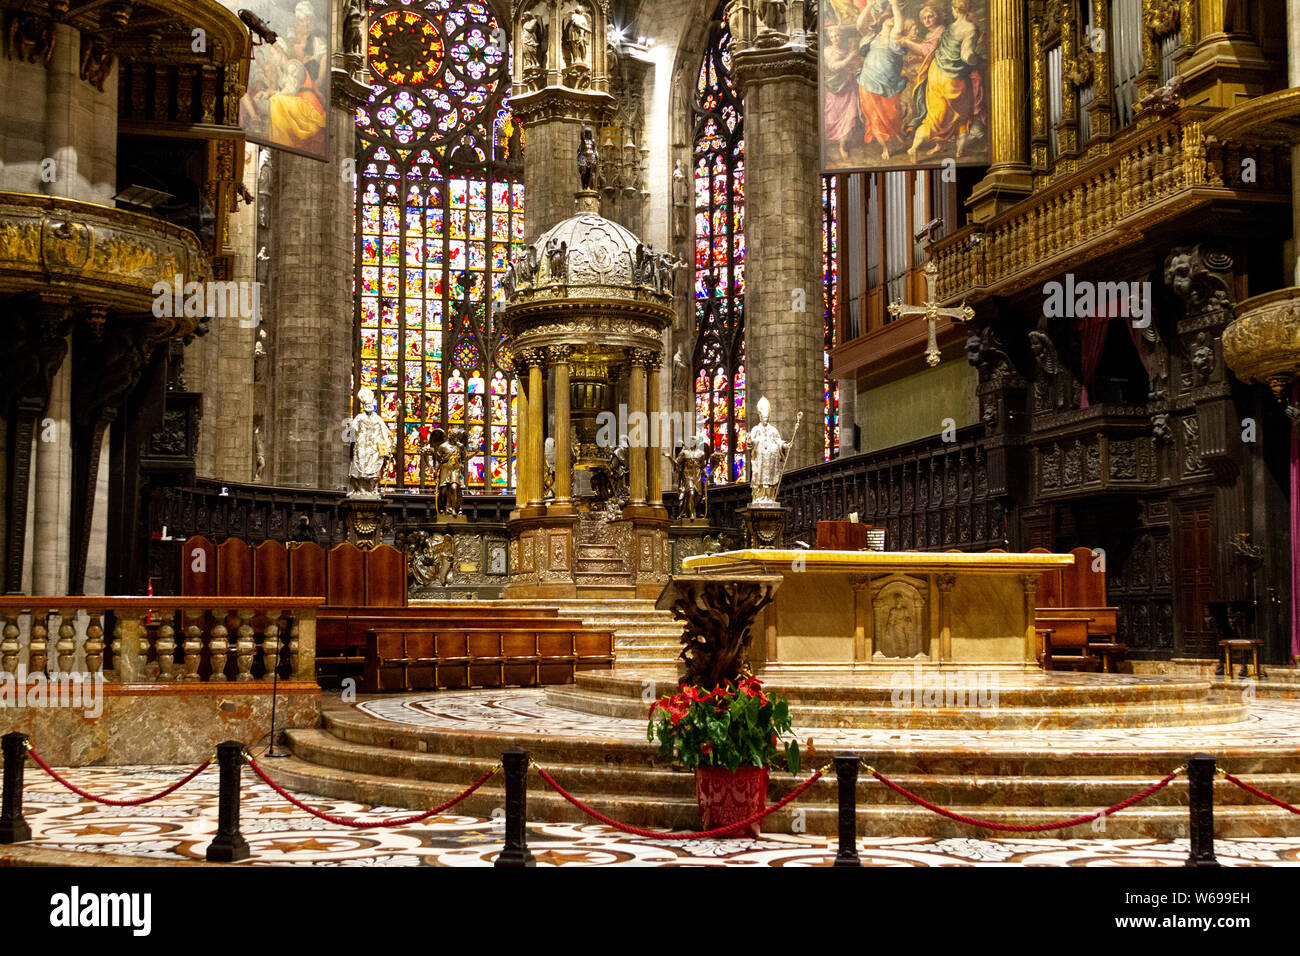 The altar with stained glass windows in the background. Duomo di Milano (Milan Cathedral). Stock Photo